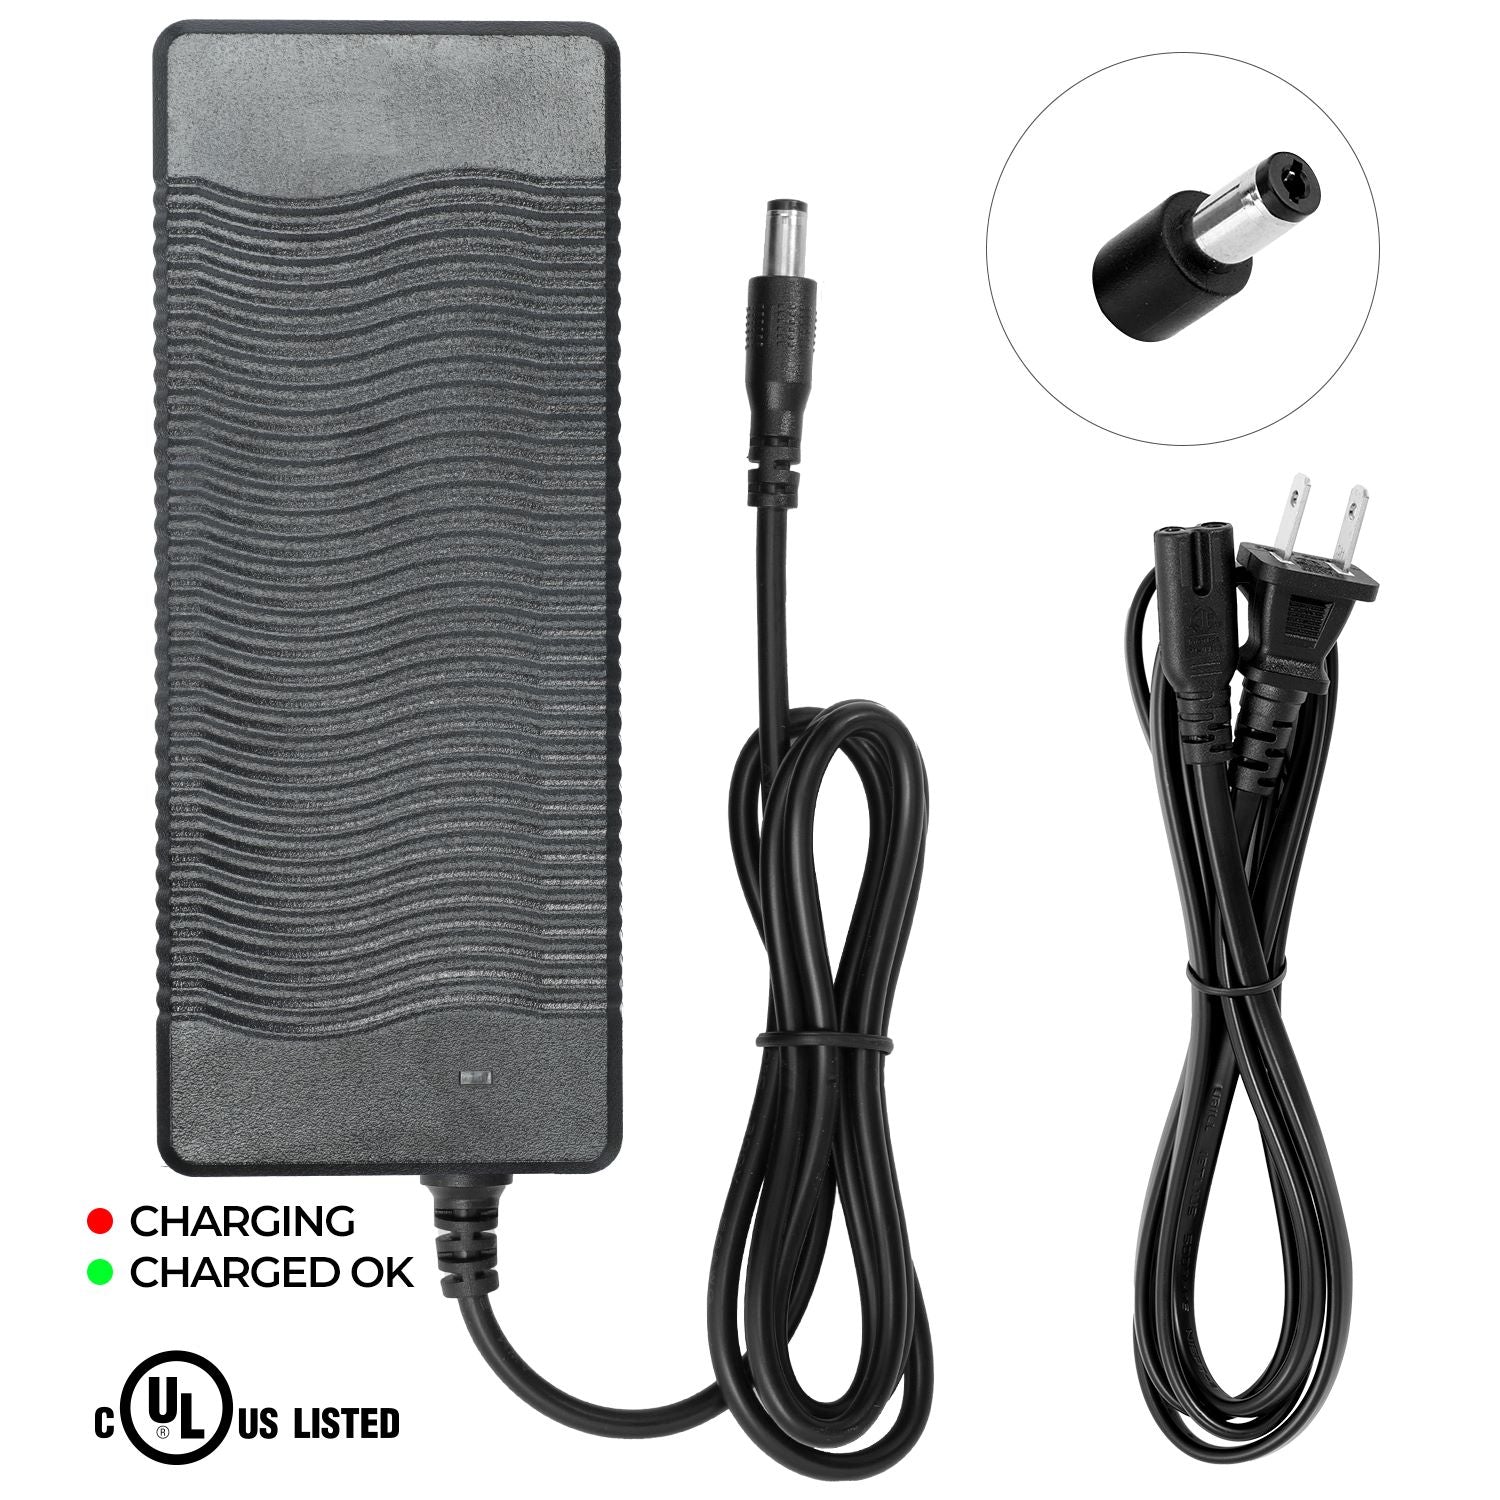 Charger for Surface 604 Electric Bike